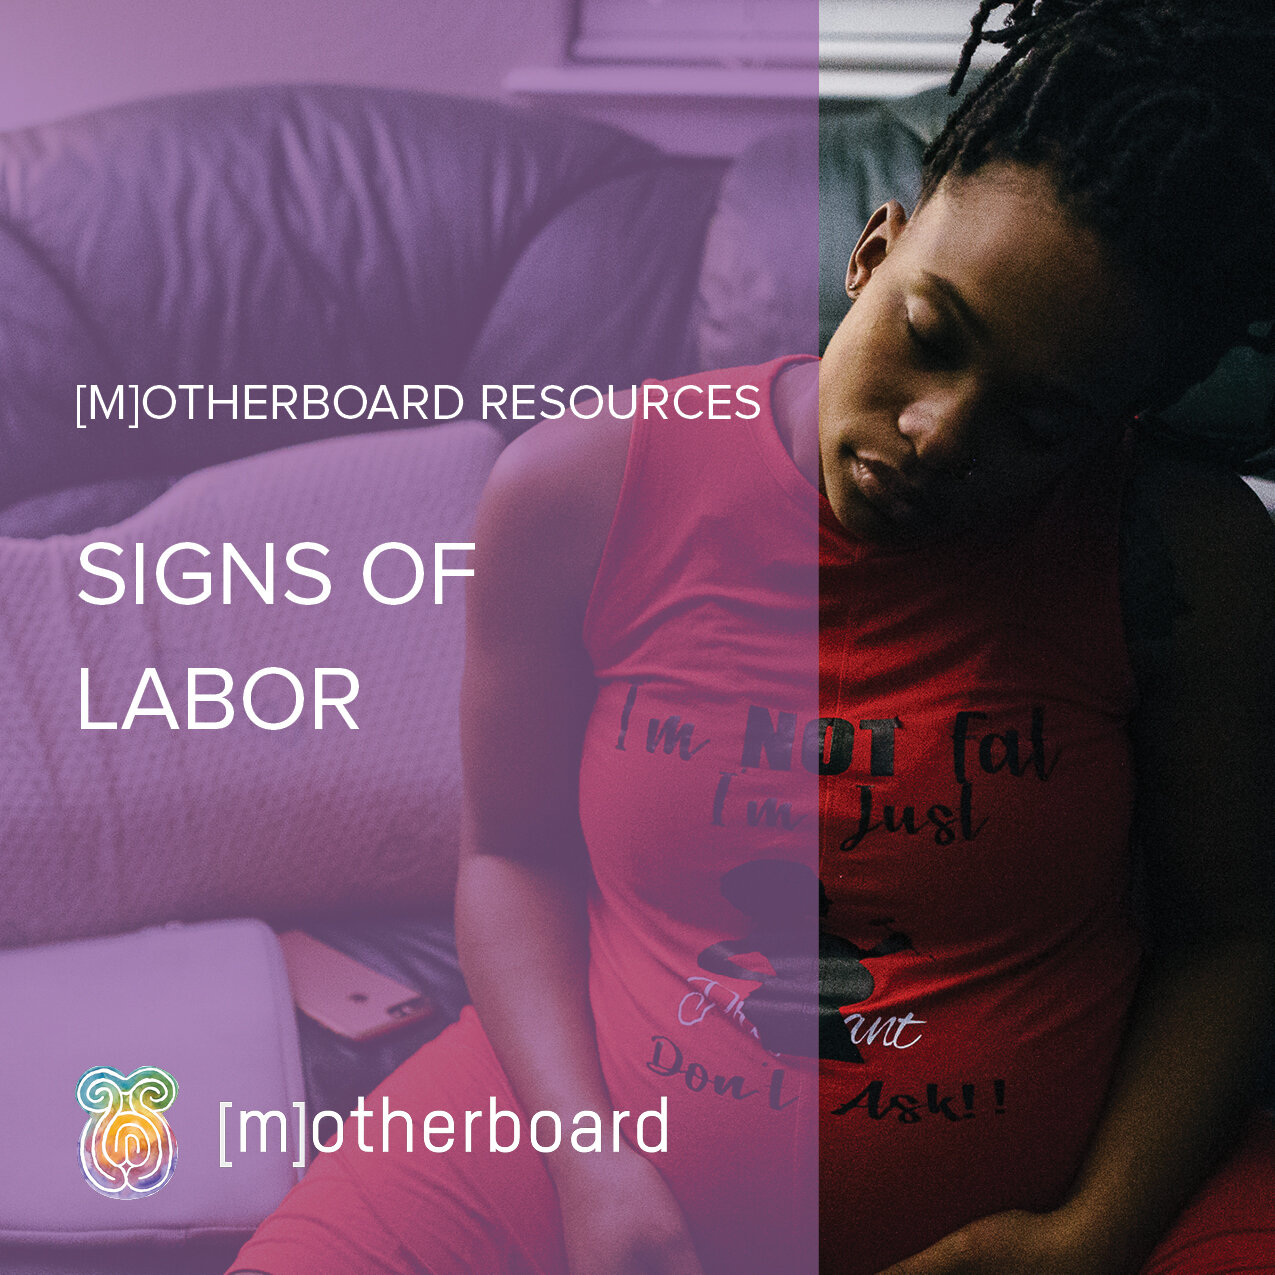 SIGNS OF LABOR